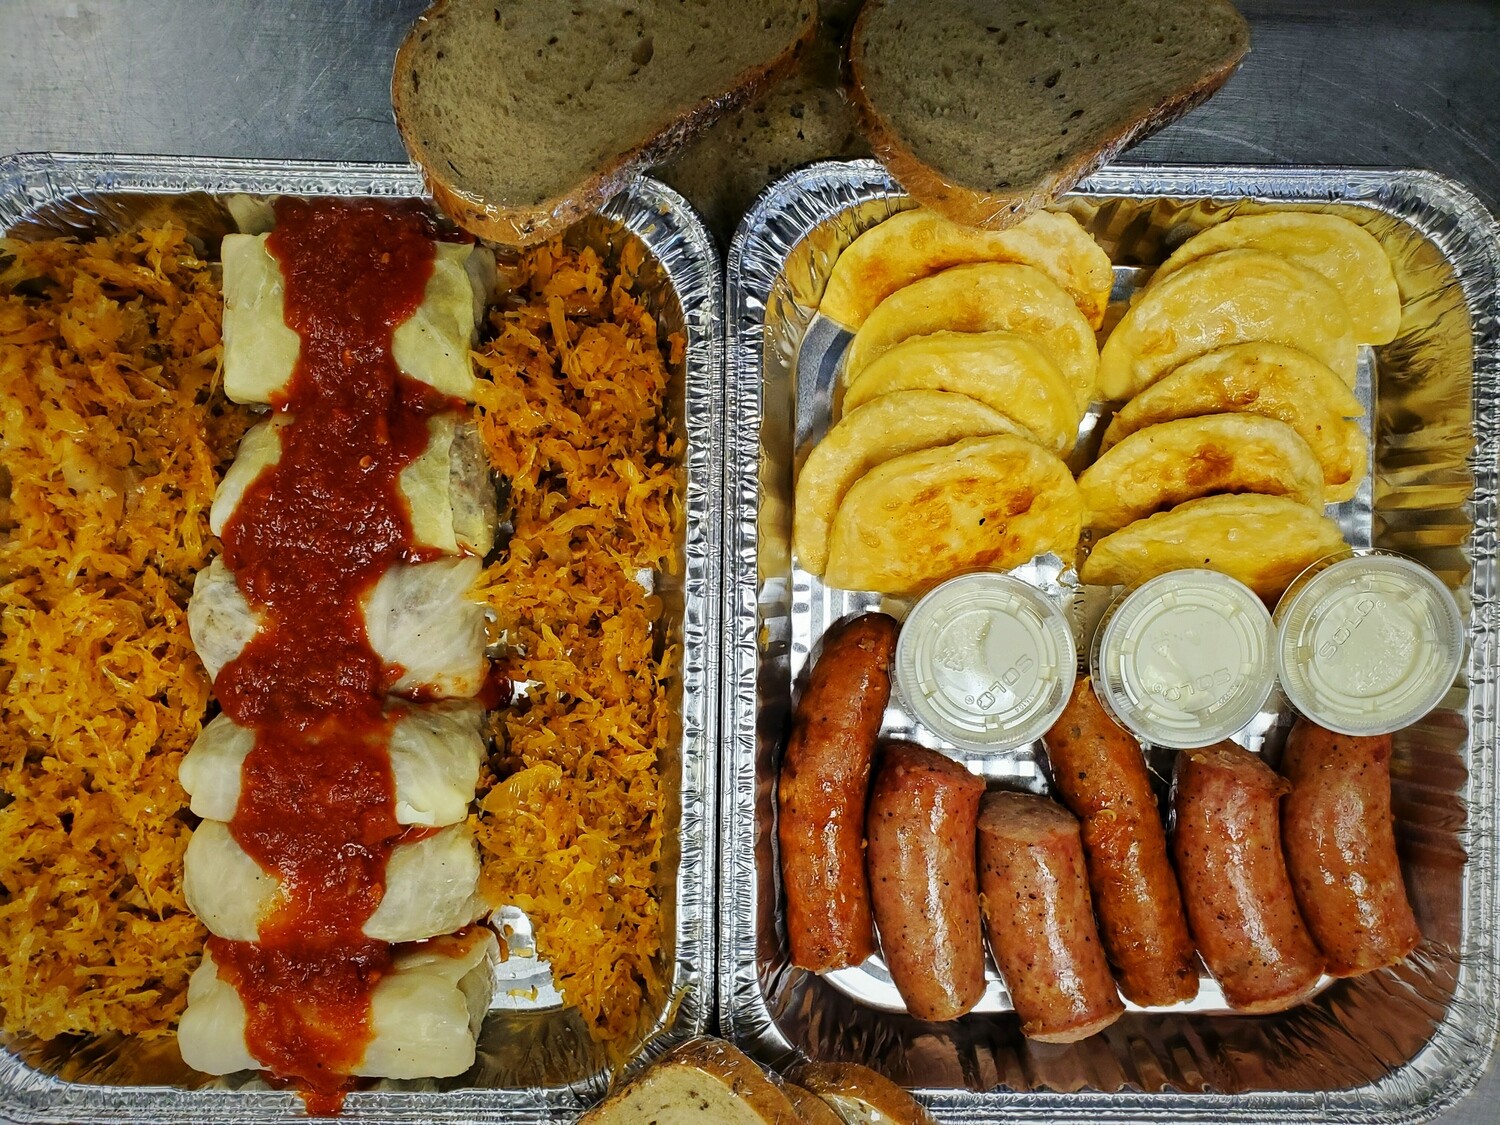 PARTY TRAY - JUST sauerkraut (our baked kraut with spices)